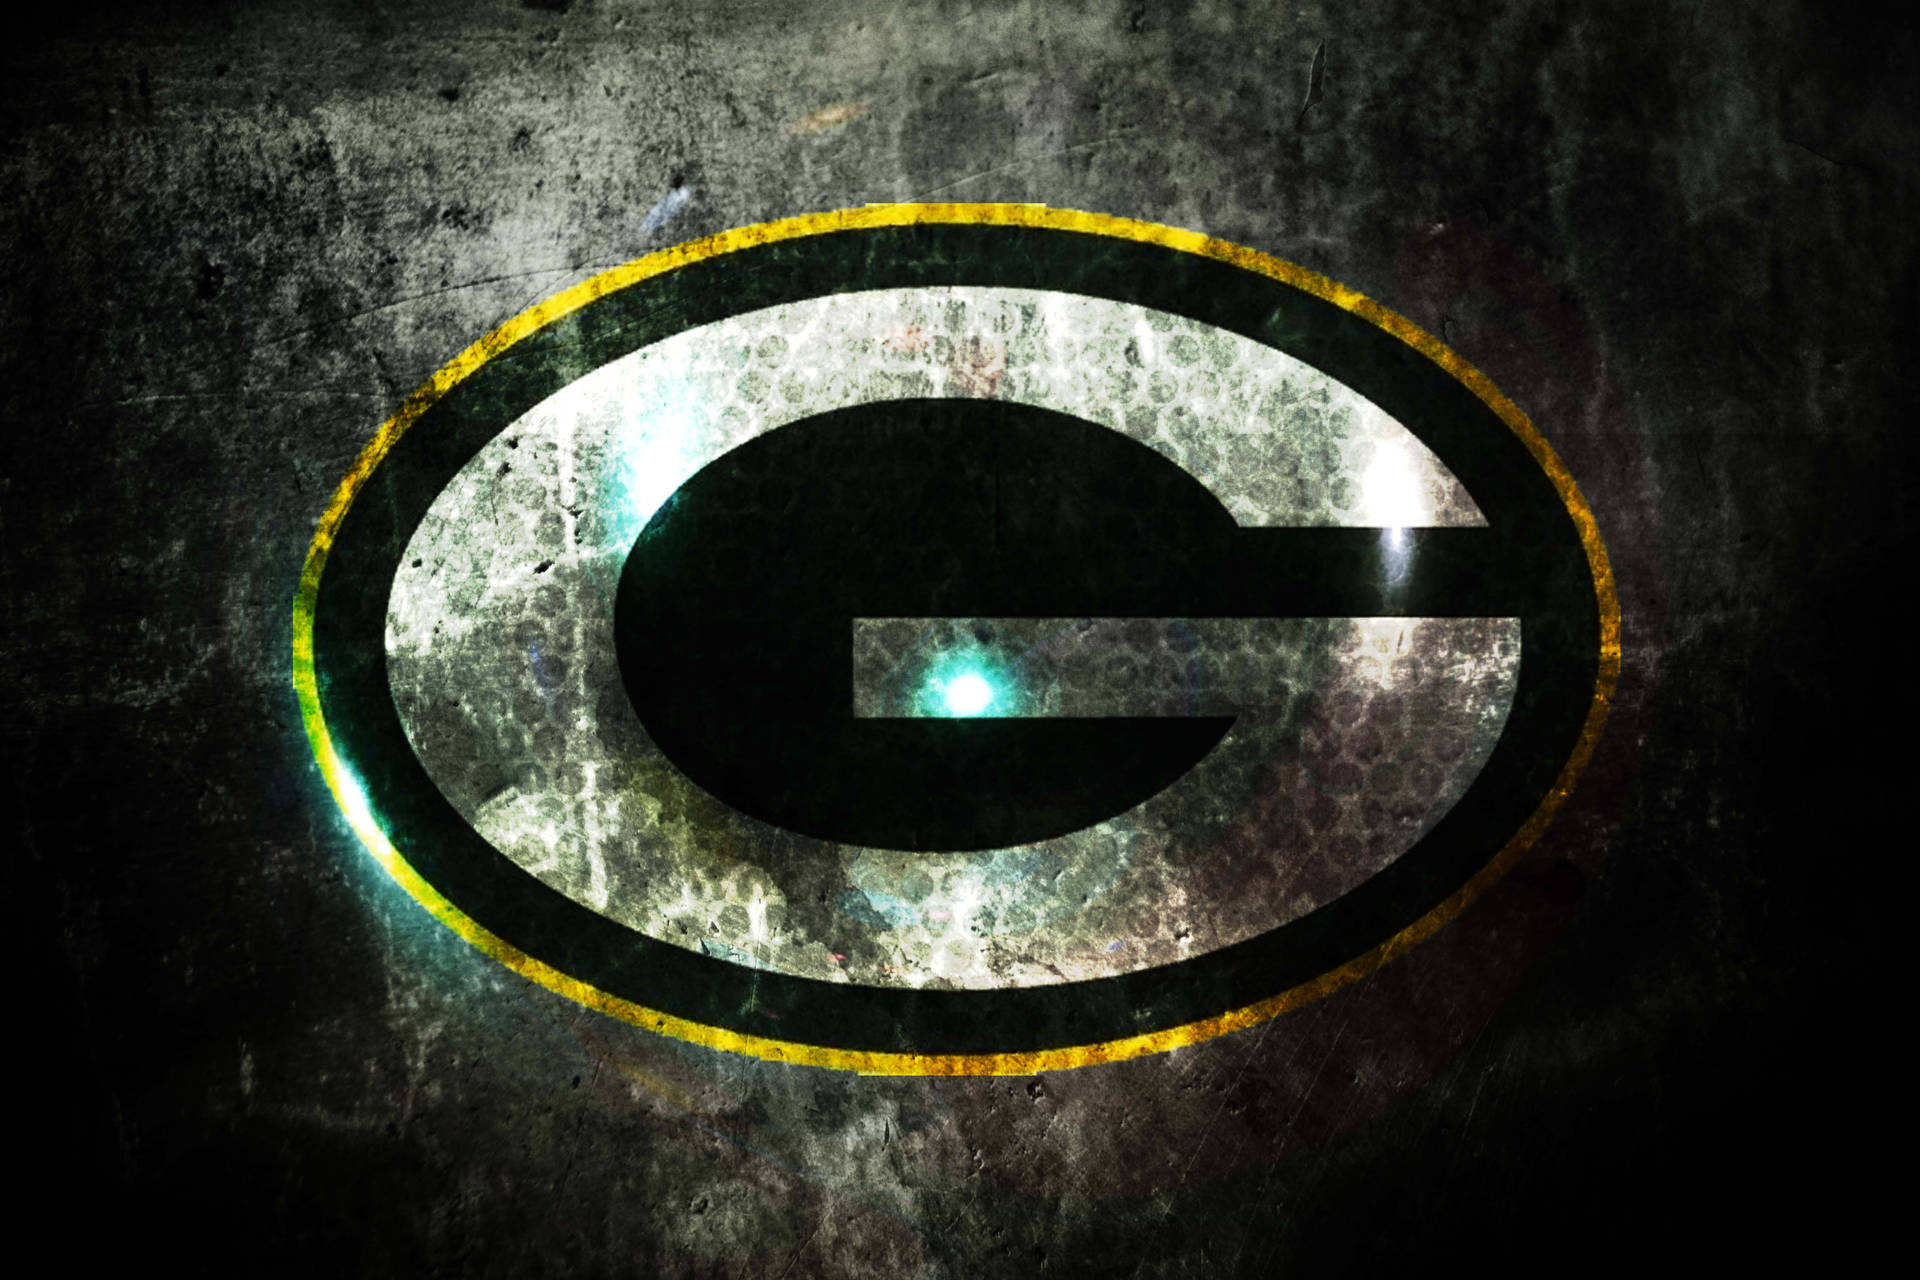 Green Bay Packers Wallpapers - Top 25 Best Green Bay Packers Backgrounds  Download